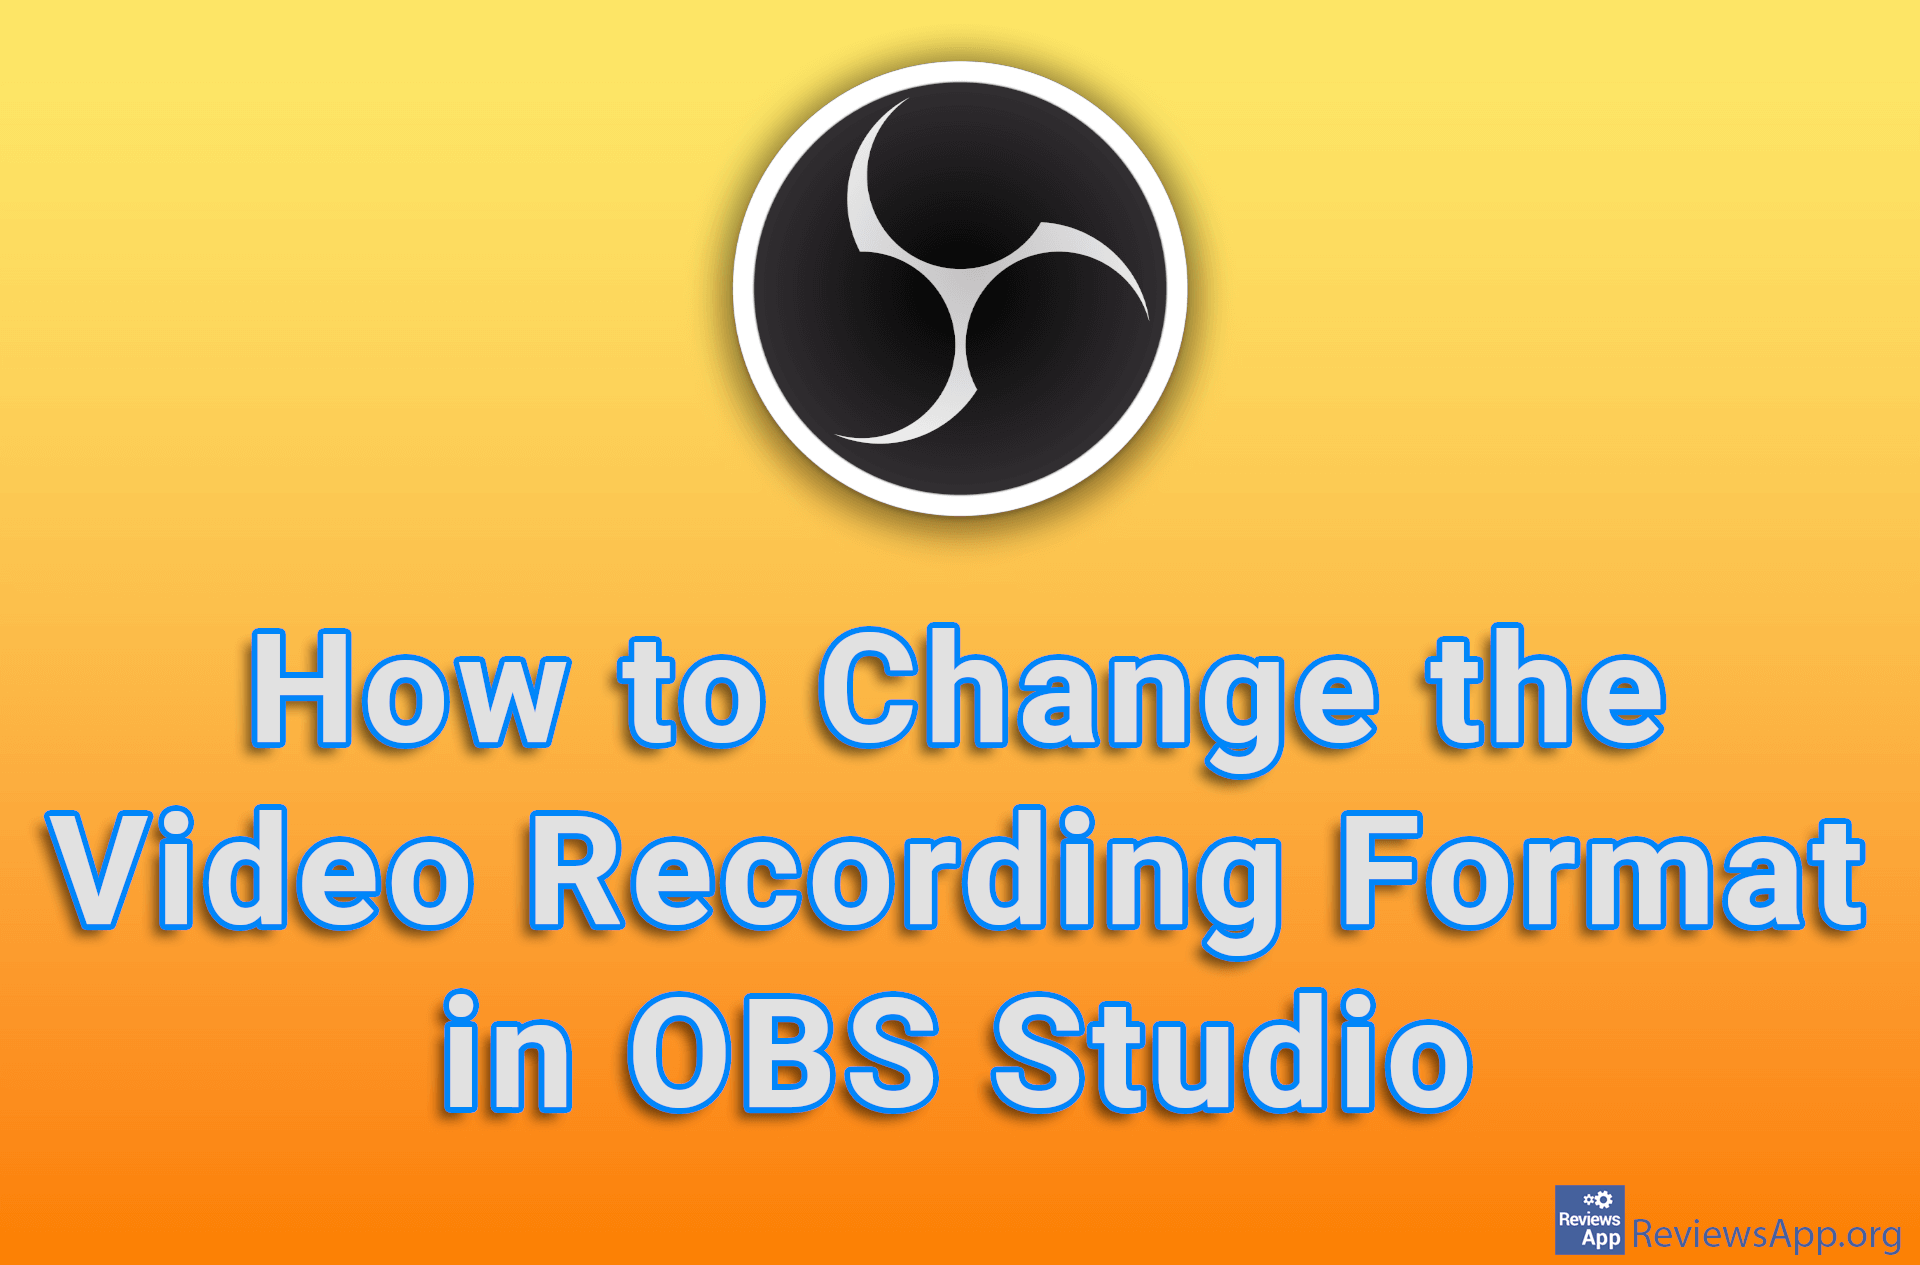 How to Change the Video Recording Format in OBS Studio